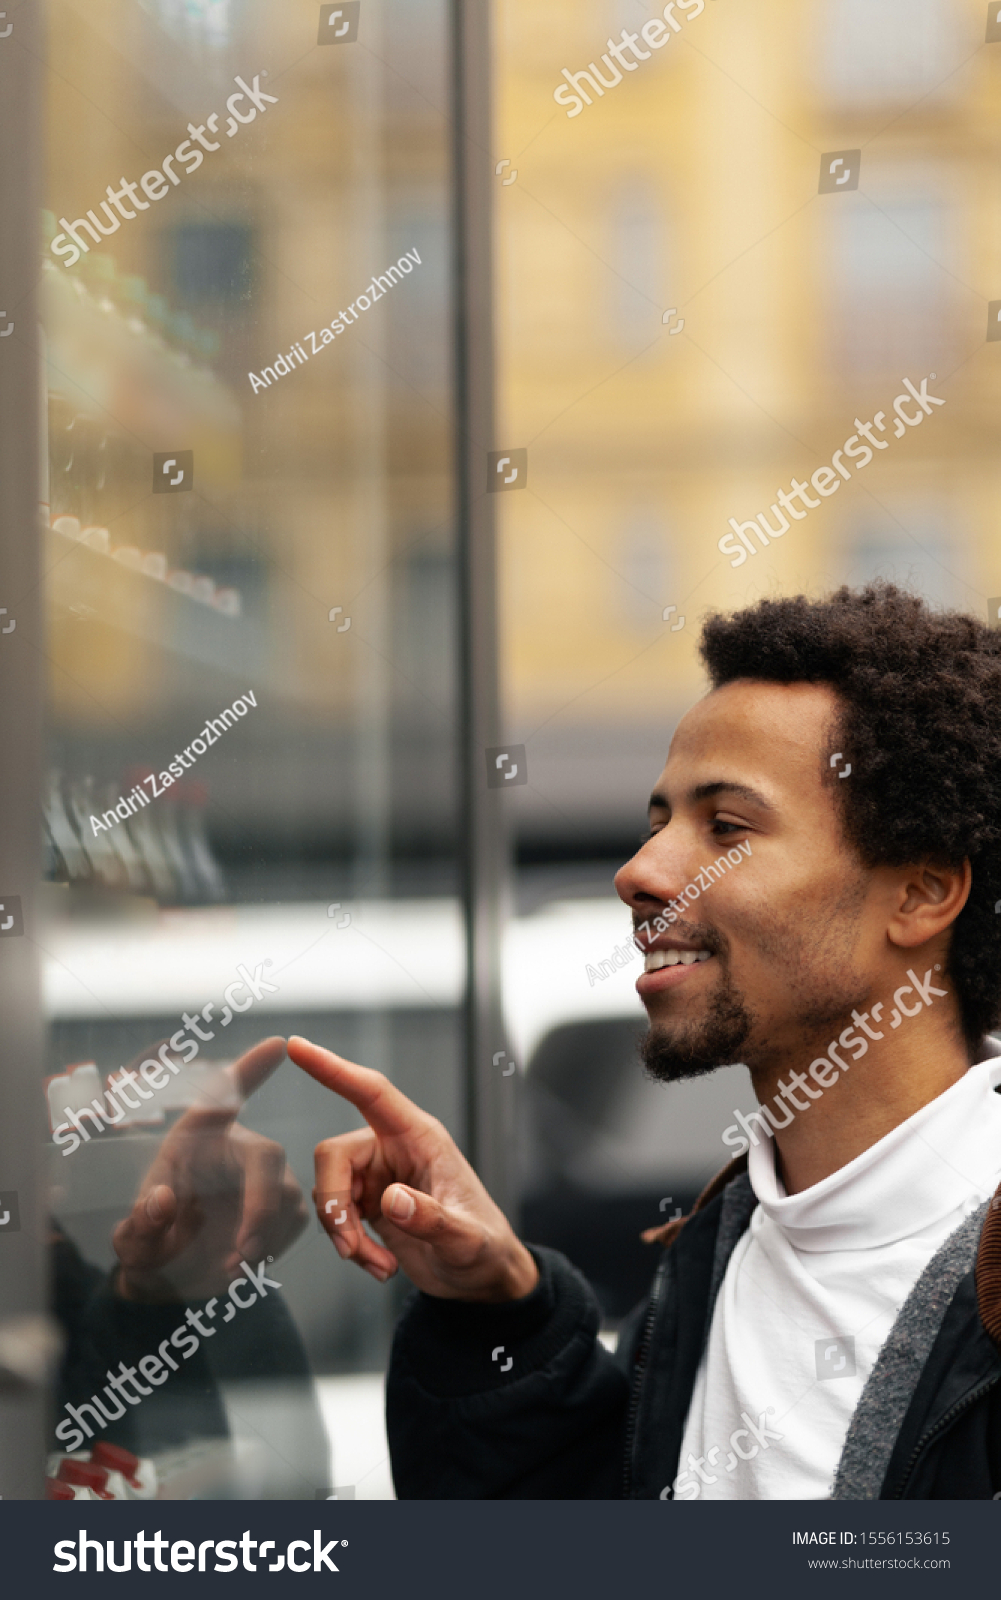 African man buys drink or sweets at vending machine outside. #1556153615